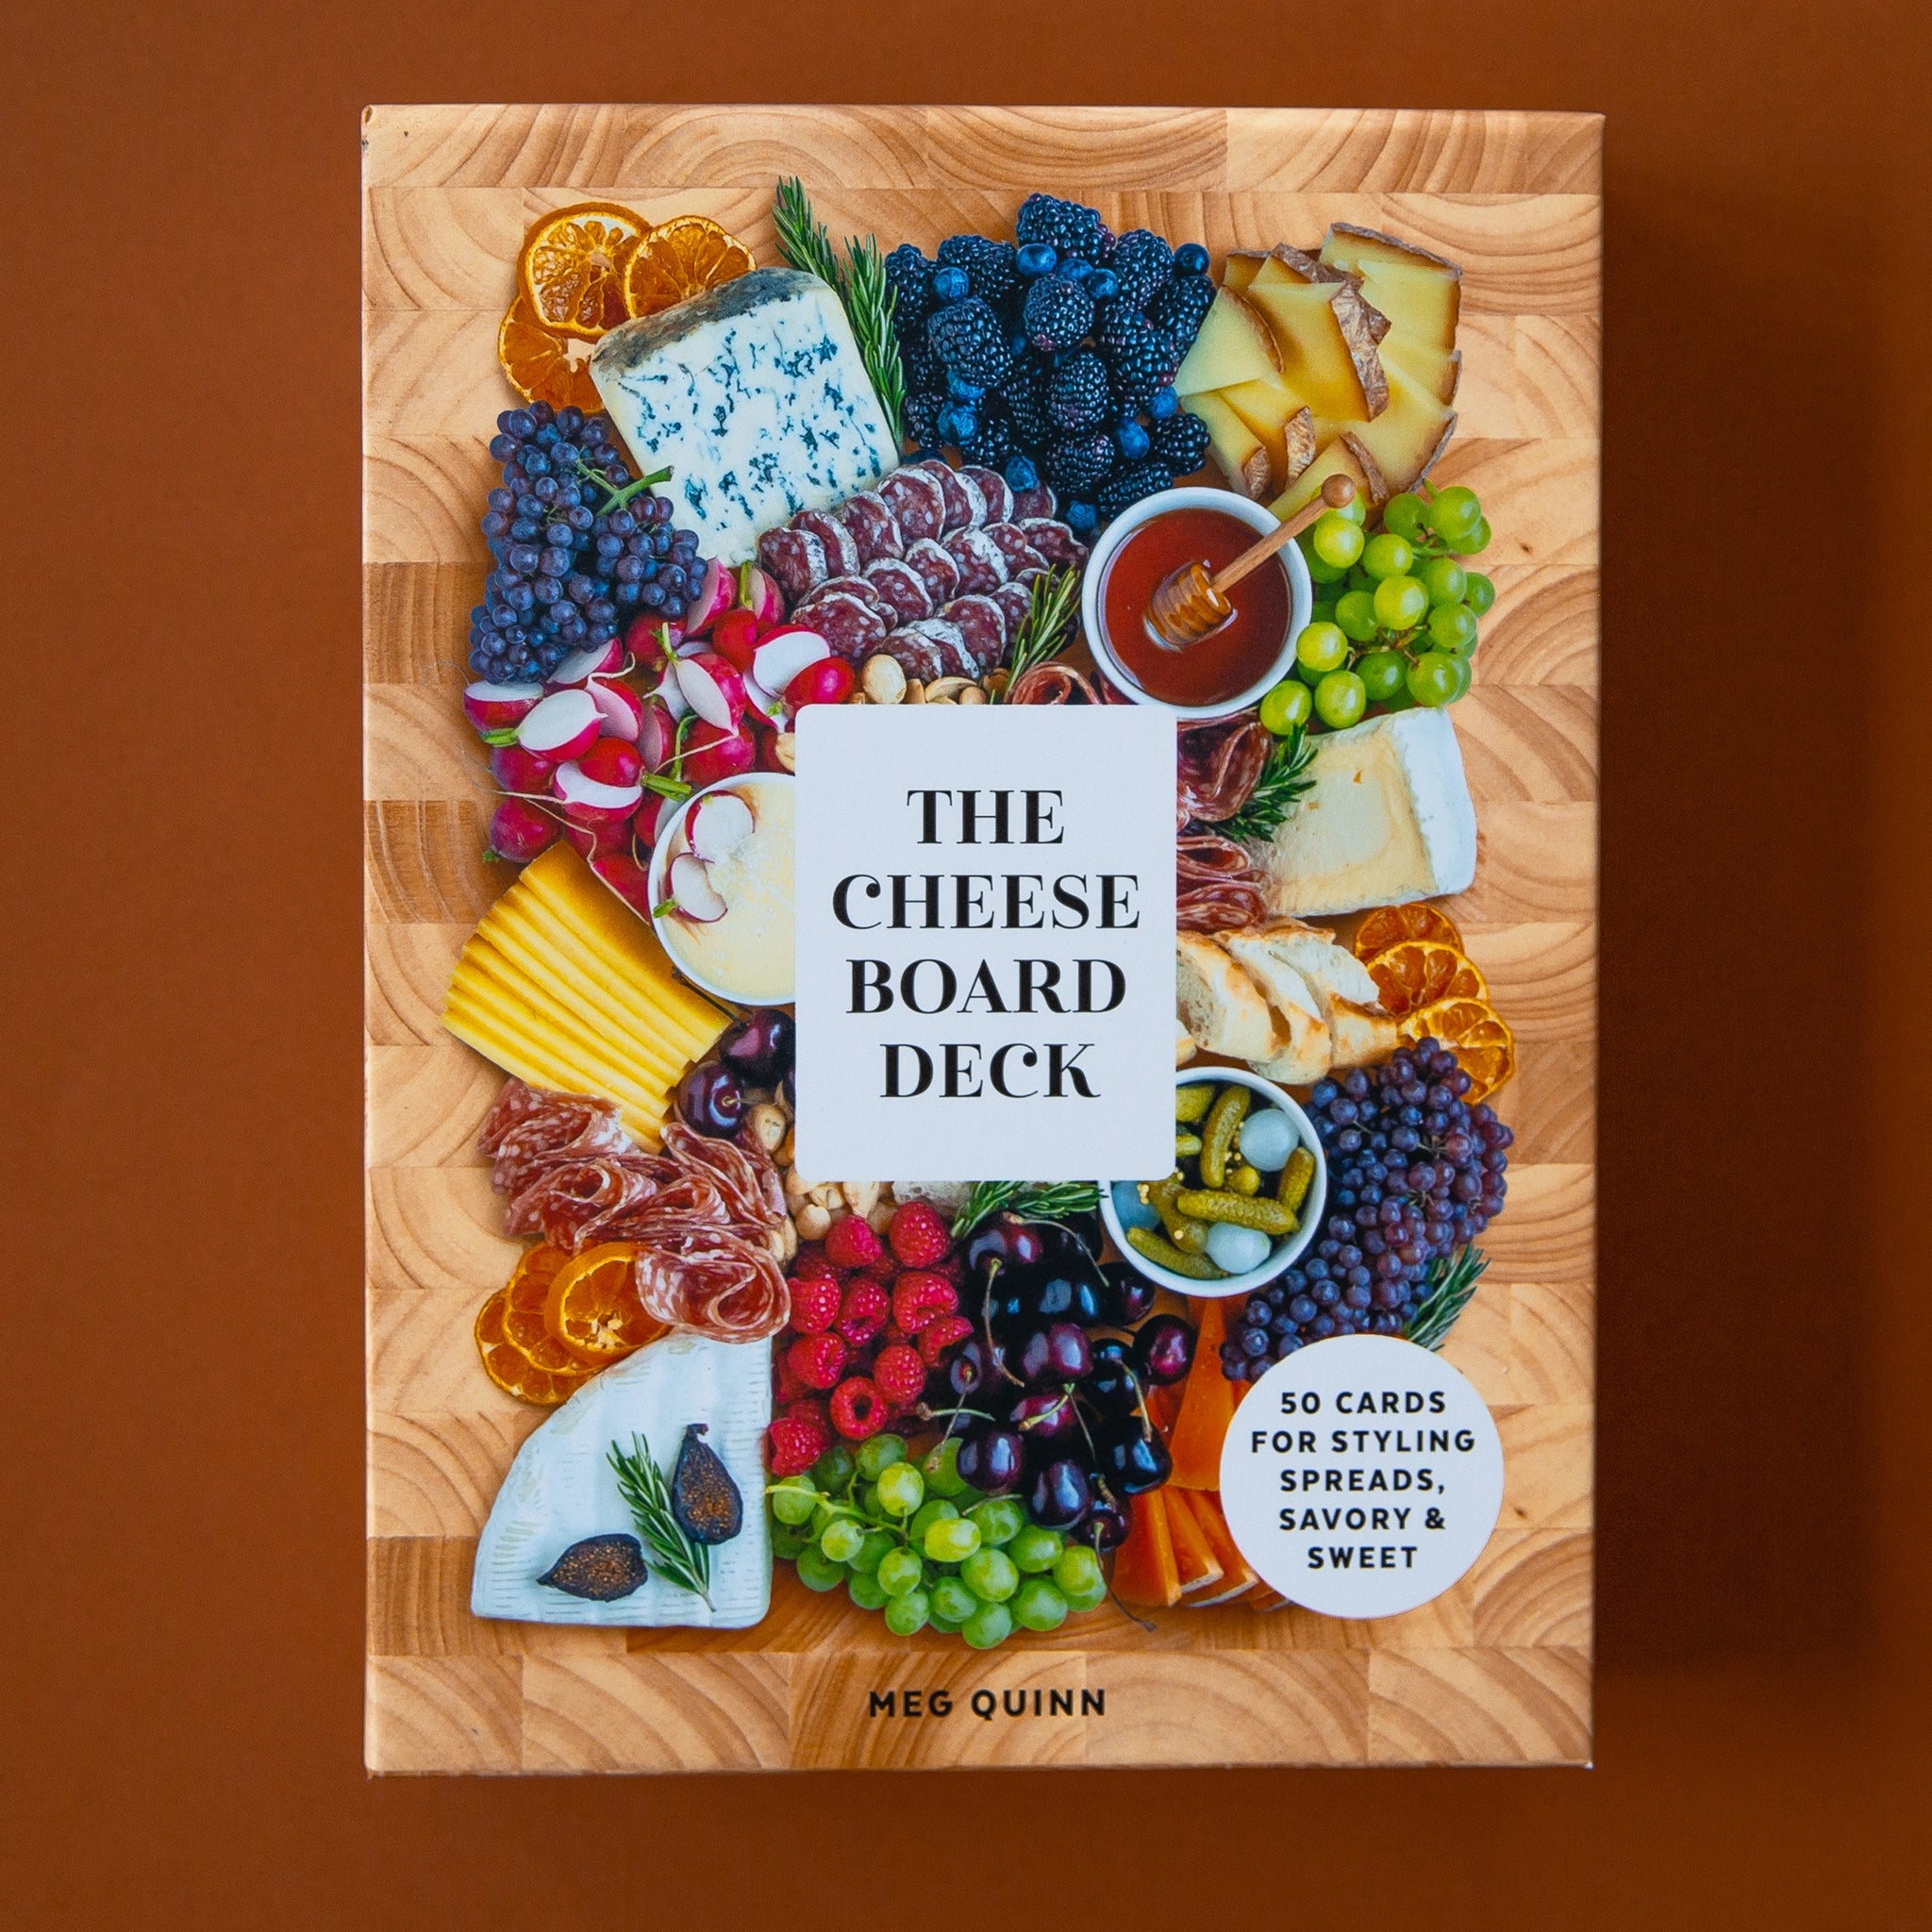 The front cover of box looks like a cheese board with an assortment of cheeses, meats and fruits along with a white square in the center that says, &quot;The Cheese Board Deck&quot;.